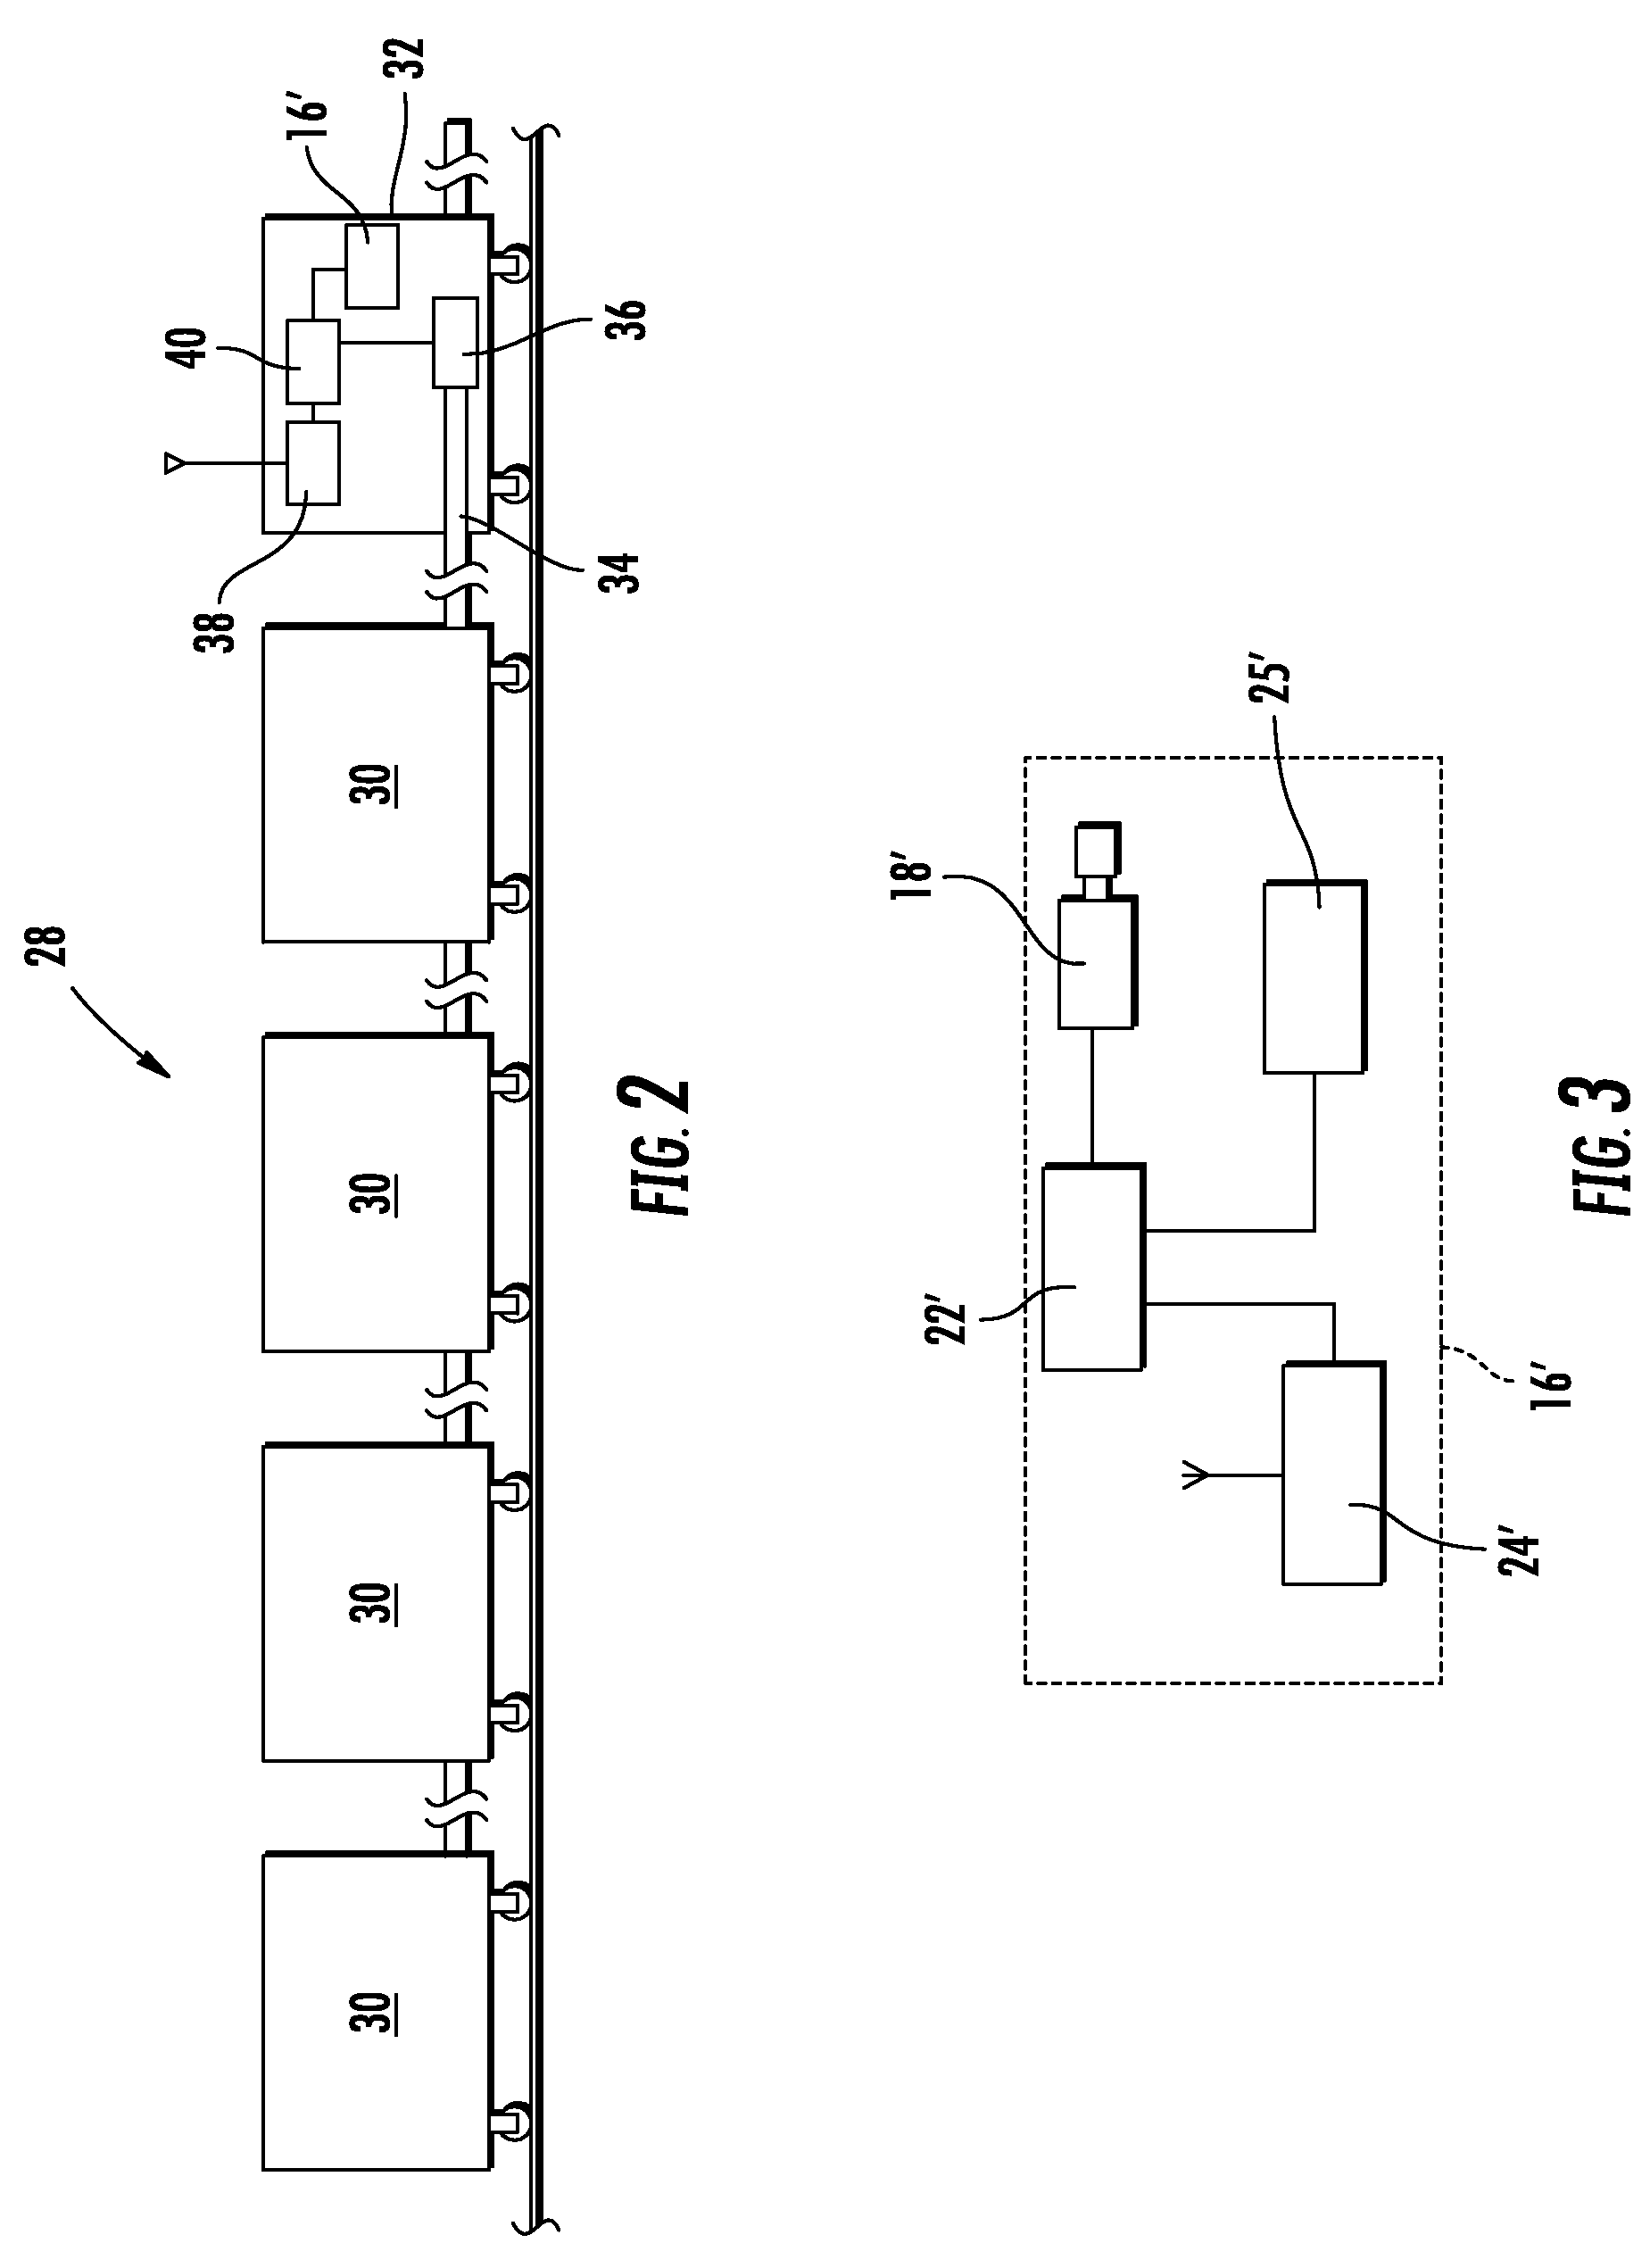 Apparatus and method for controlling remote train operation